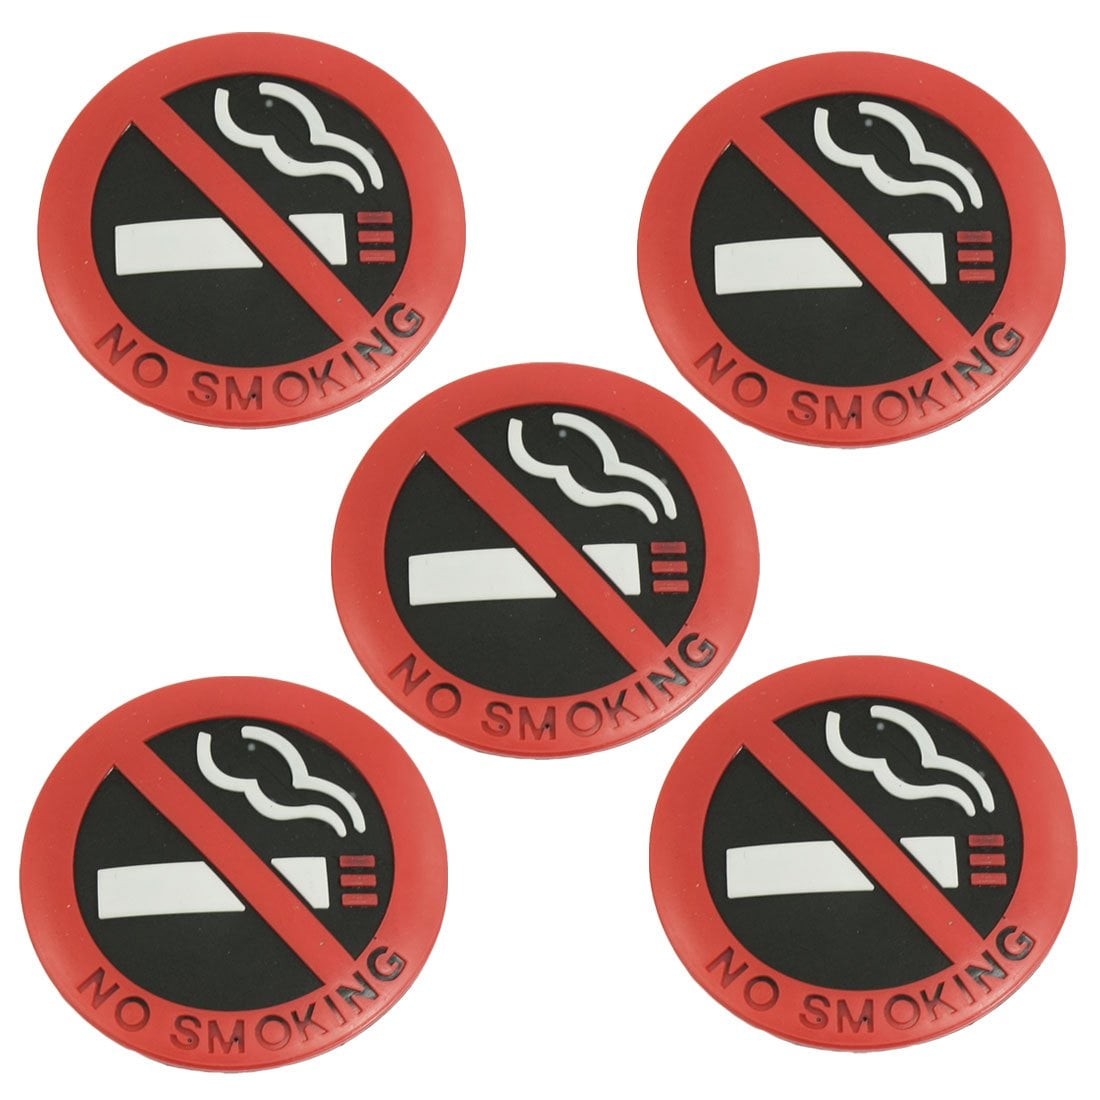 SMOKING PERMITTED Sticker Decal waterproof outdoor high quality White Background 